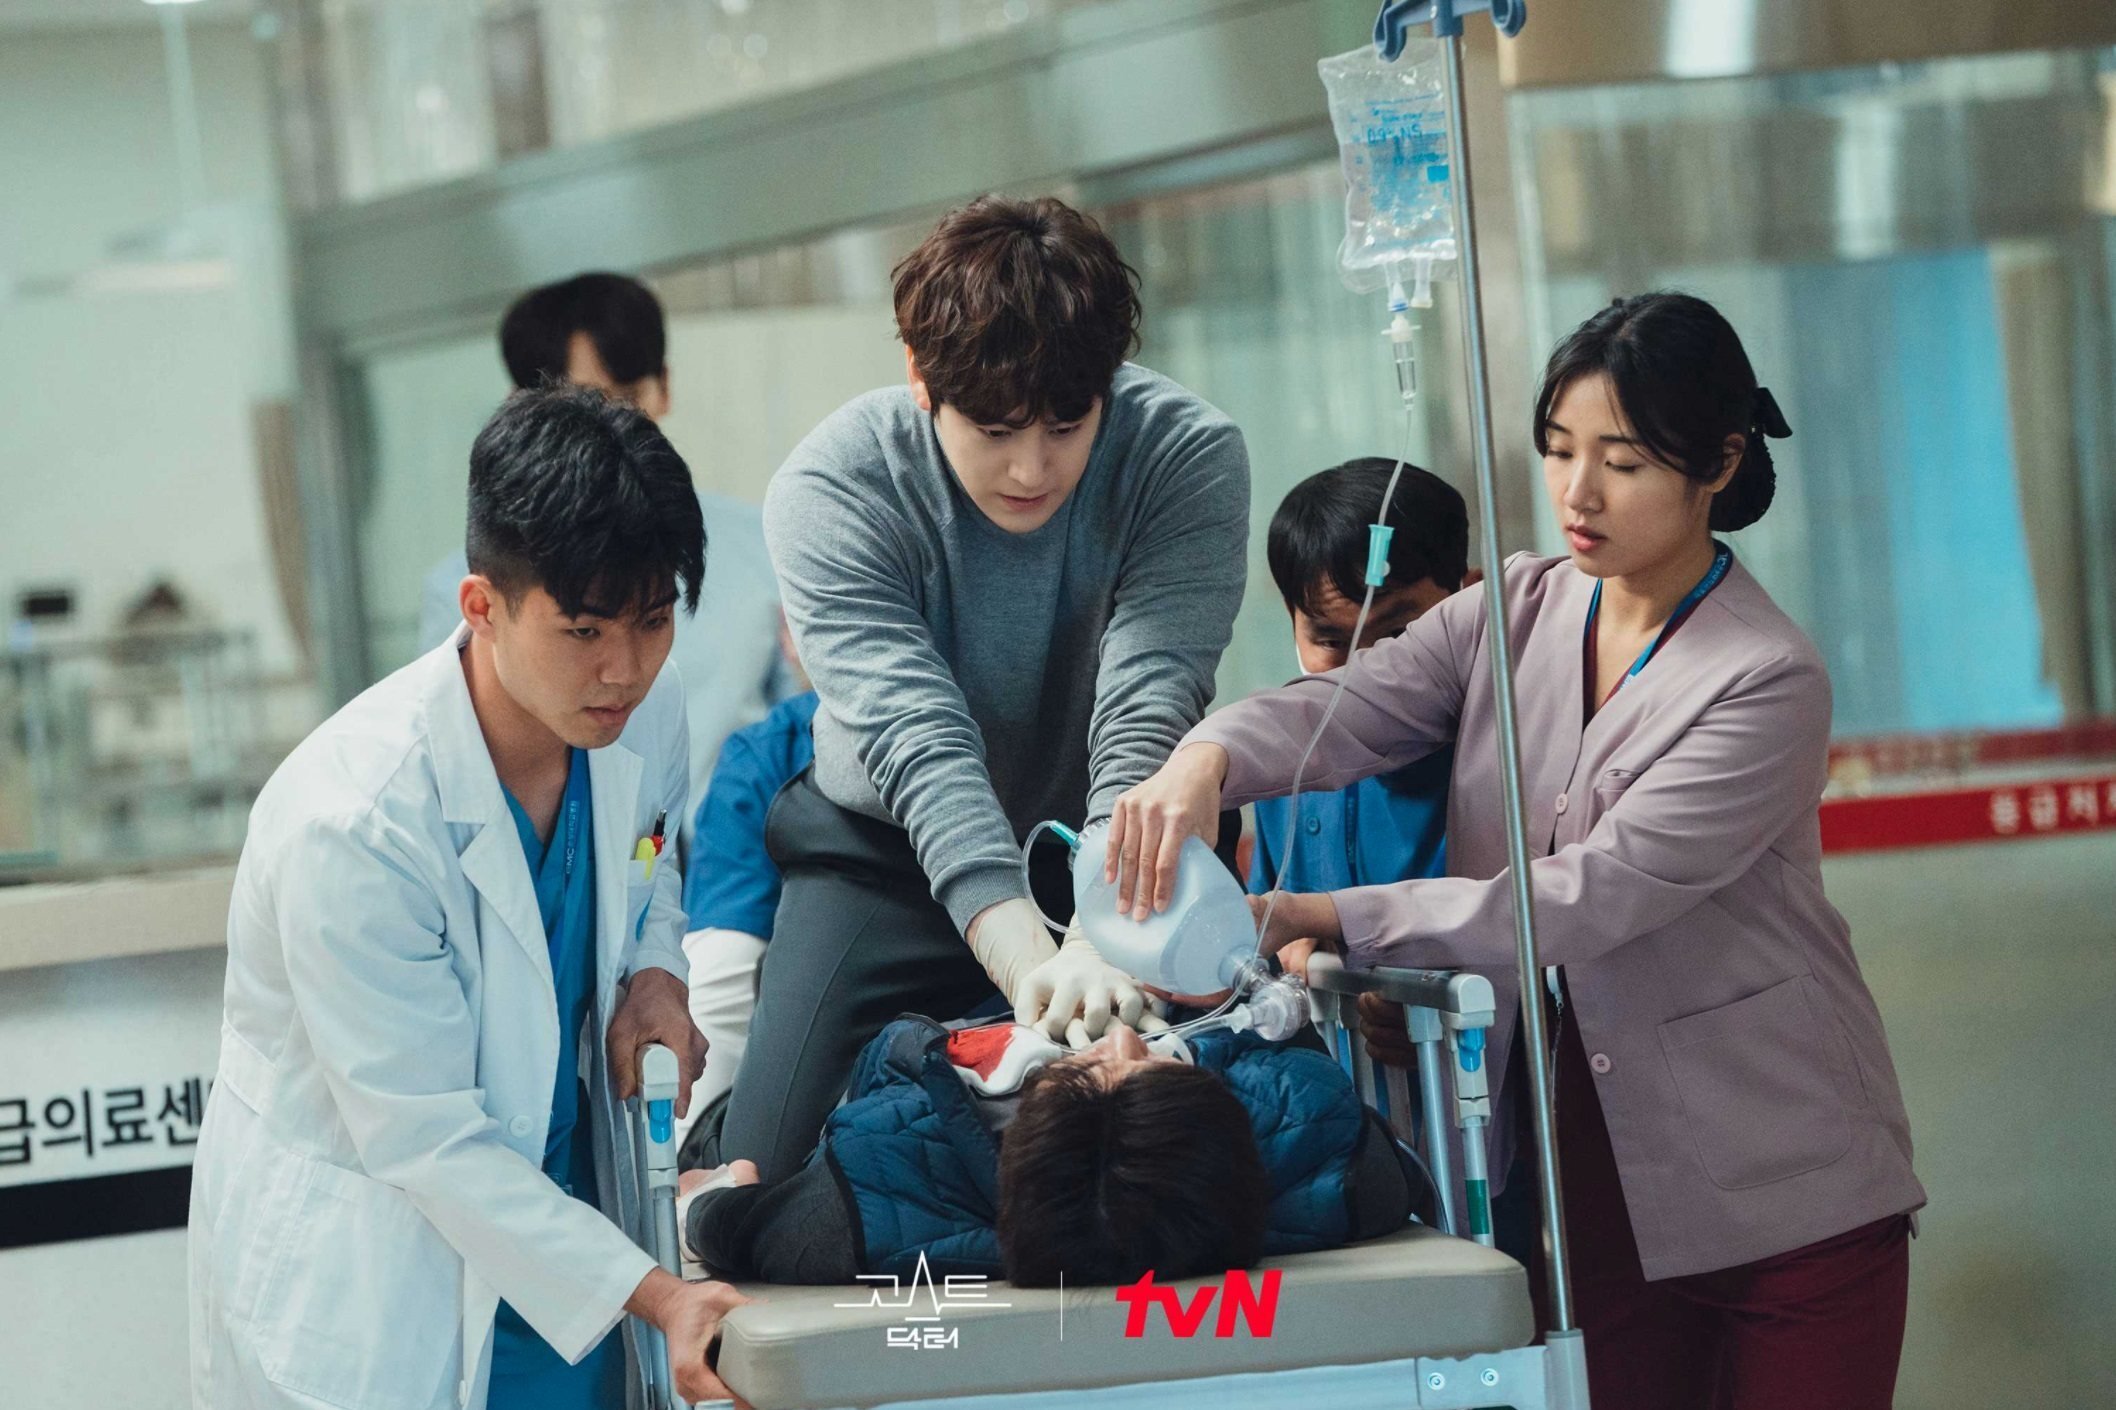 K-drama review: Ghost Doctor – supernatural medical drama starring Rain  ends comfortable journey where you expect it to | South China Morning Post